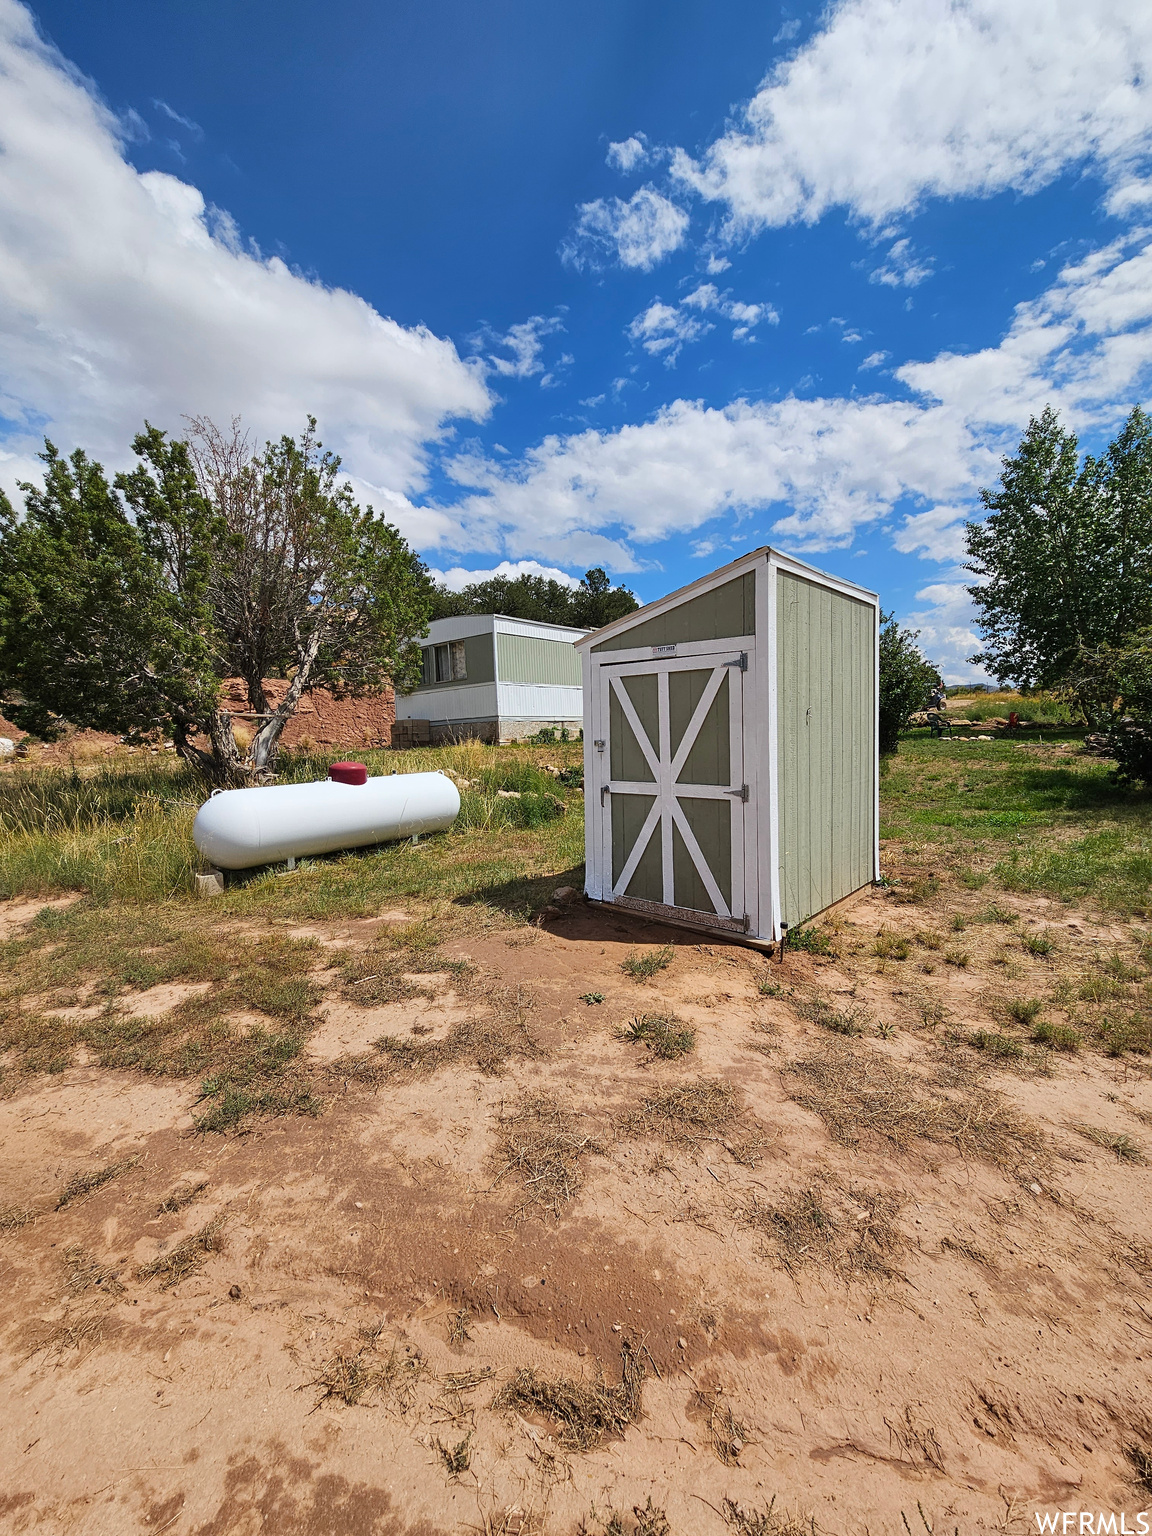 Shed Included - Propane Tank Leased